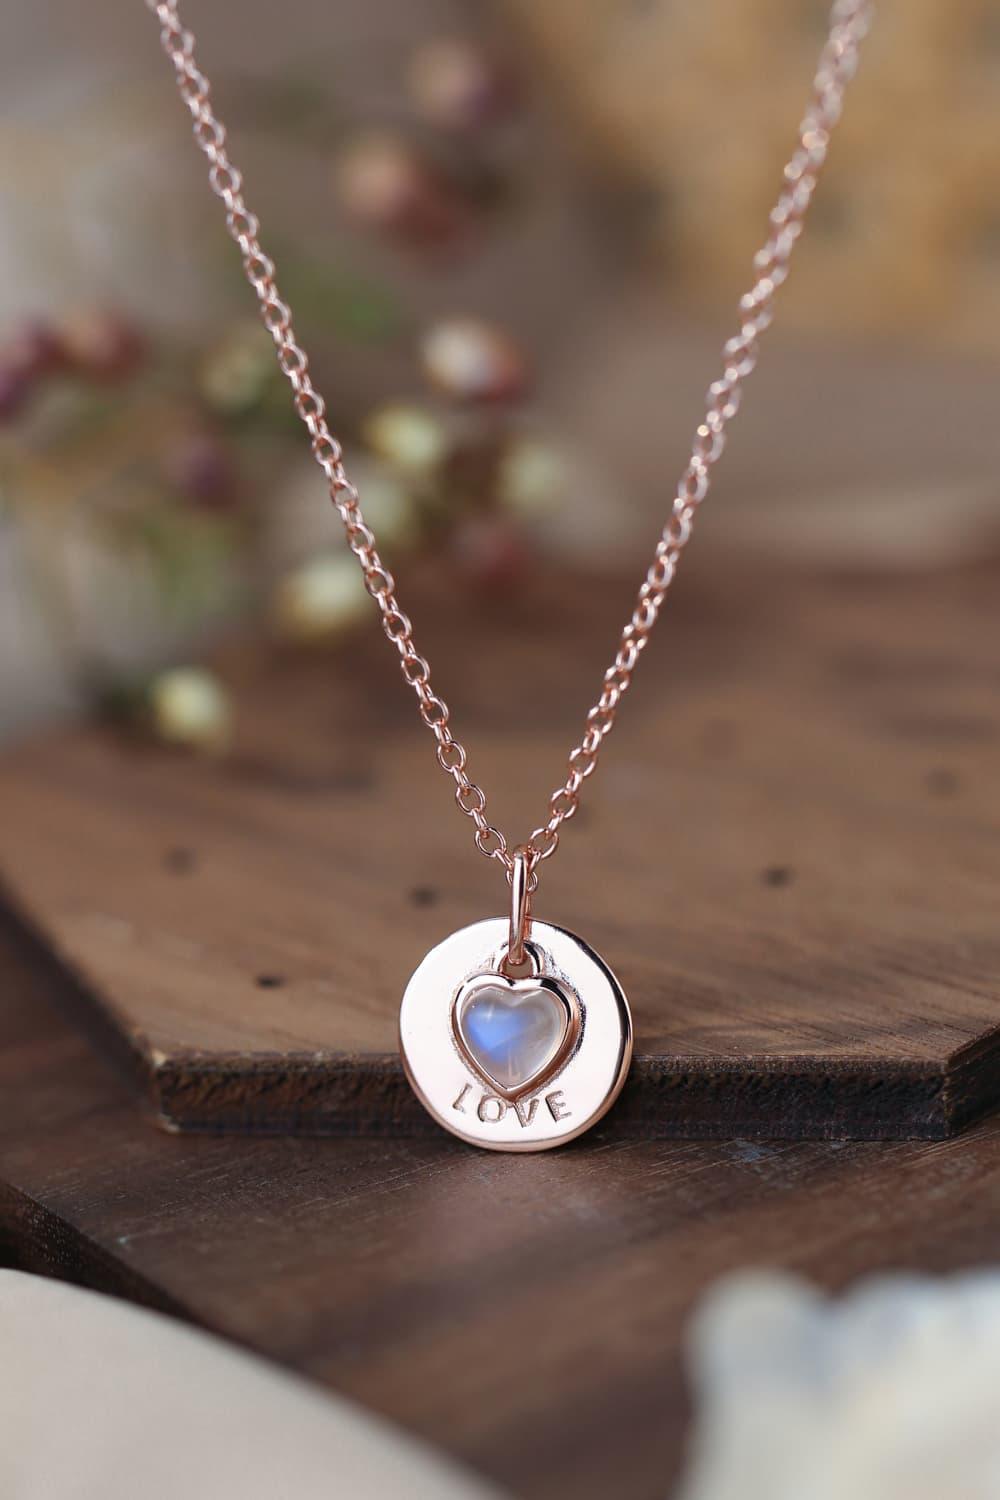 Moonstone LOVE Heart Pendant 925 Sterling Silver Necklace - God's Girl Gifts And Apparel